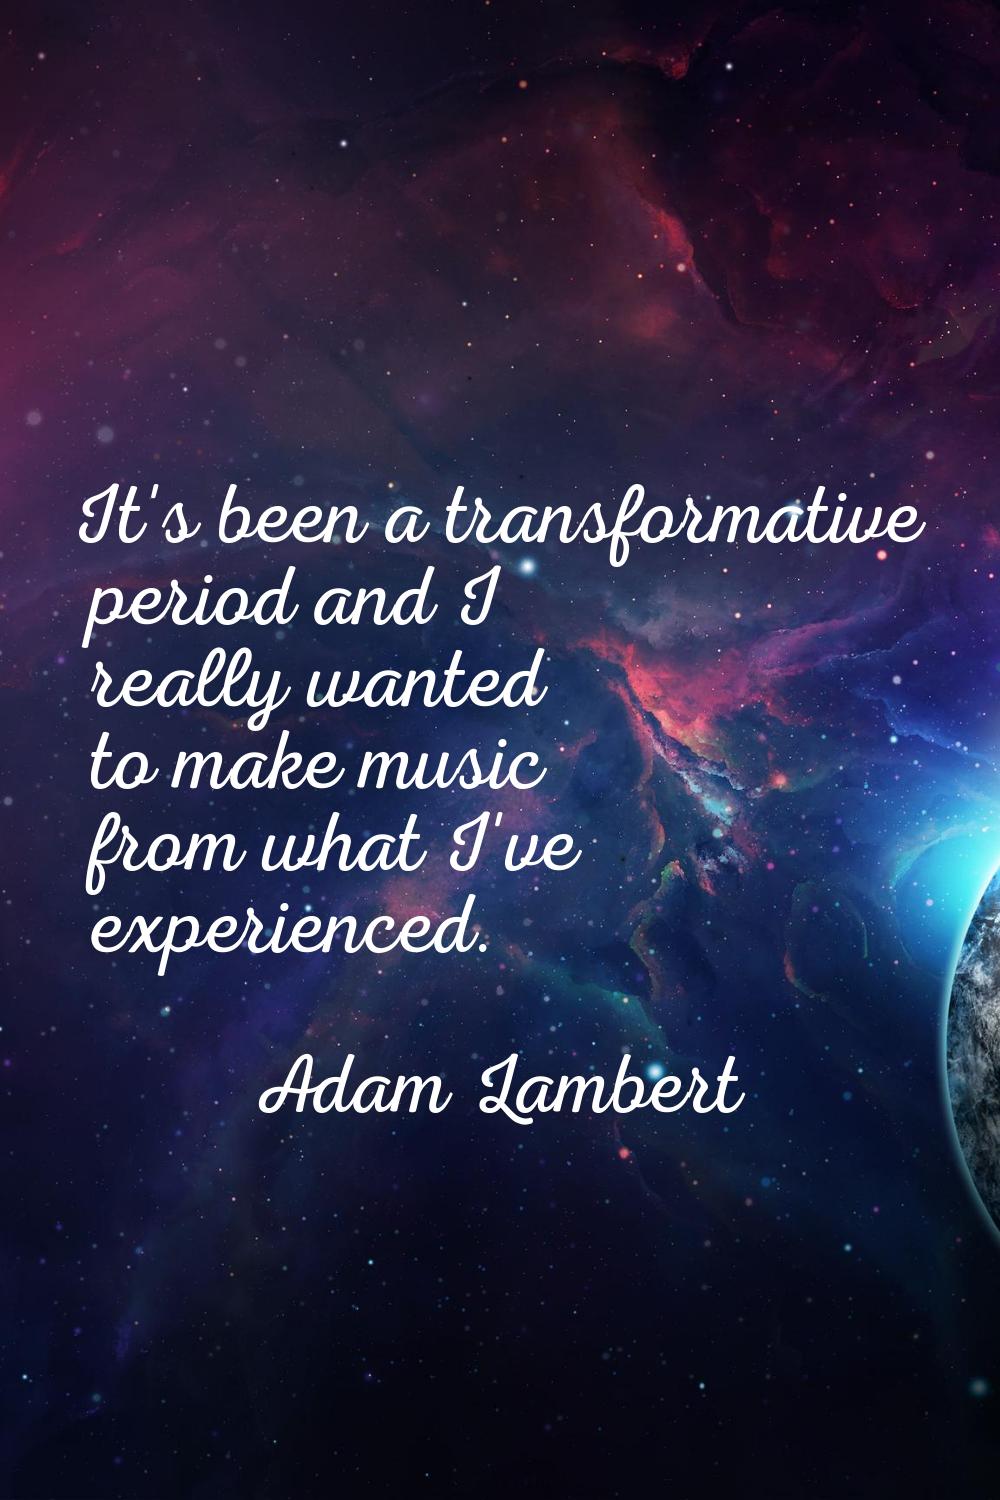 It's been a transformative period and I really wanted to make music from what I've experienced.